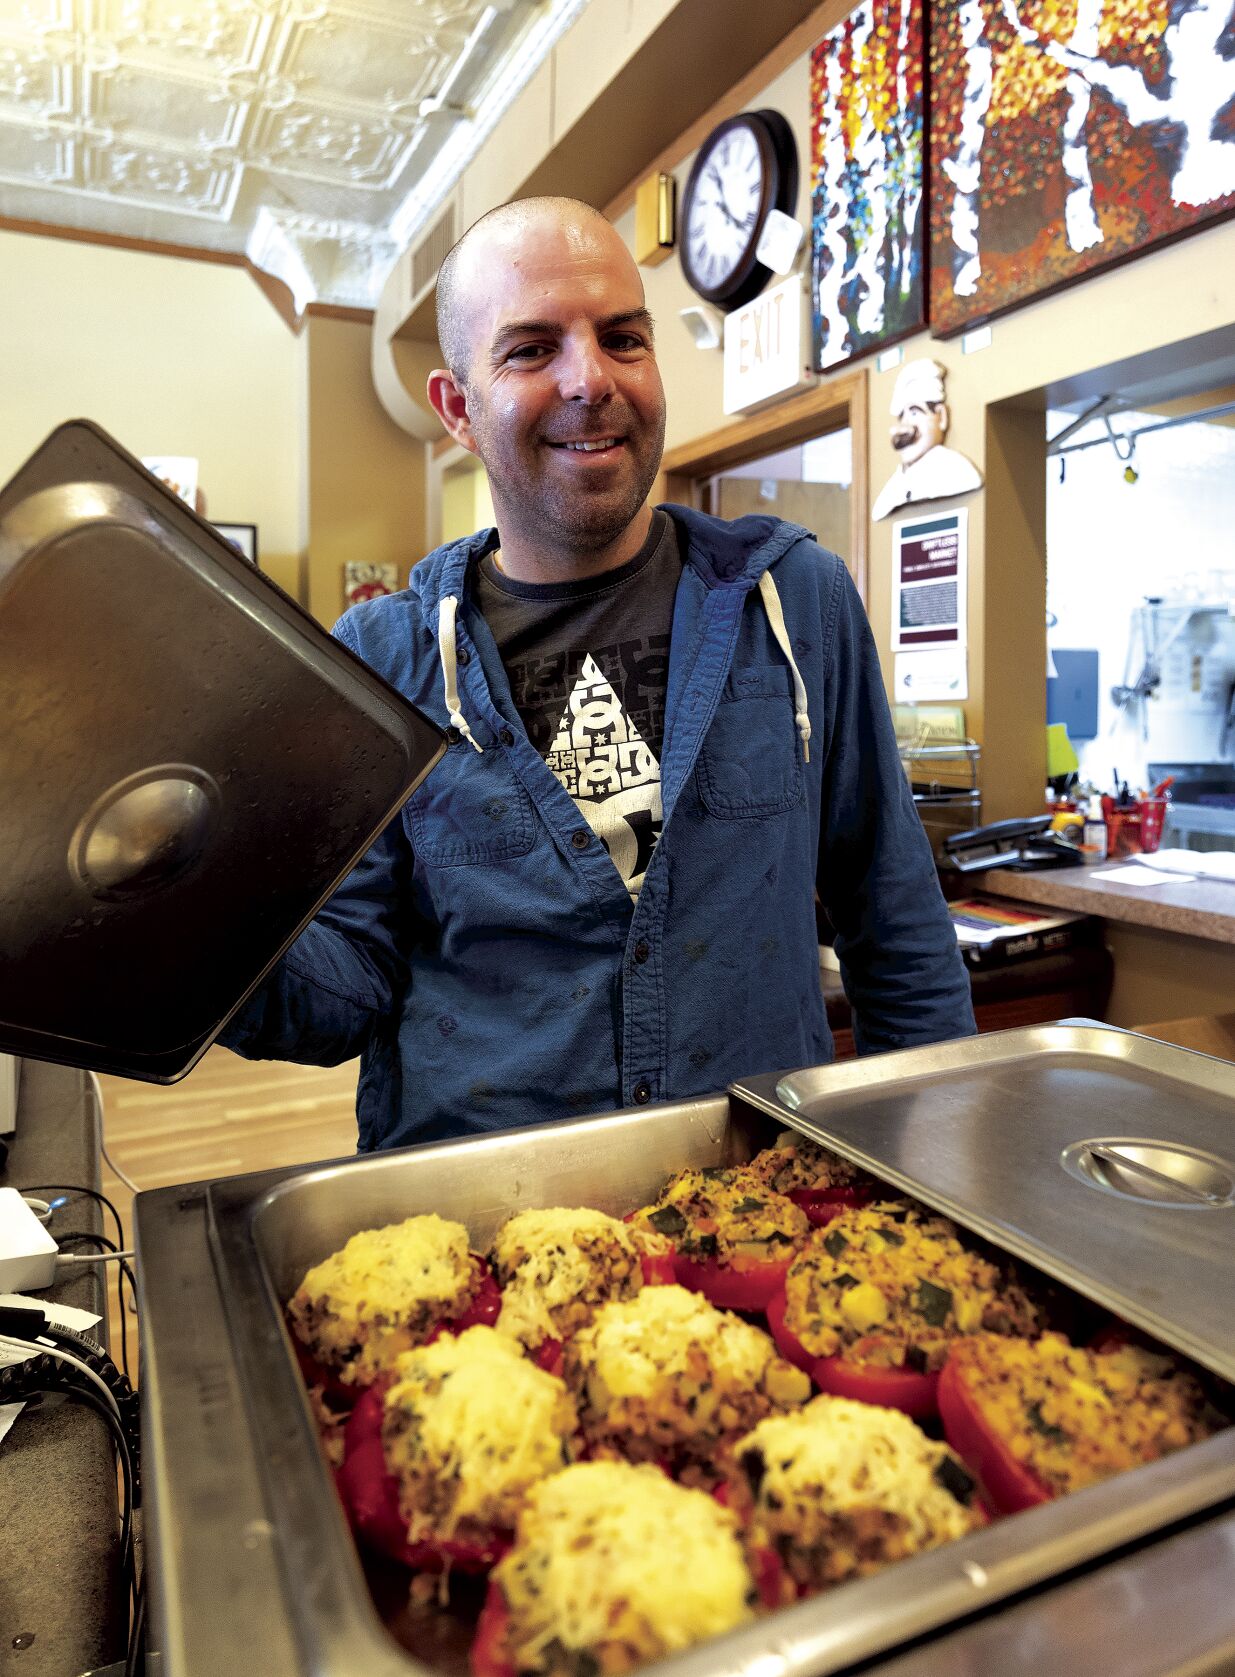 Store manager Nate Robinson shows off the stuffed peppers being served at Driftless Market. Imperfect-looking produce has been redirected from the store’s shelves to its deli to minimize food waste.    PHOTO CREDIT: Stephen Gassman